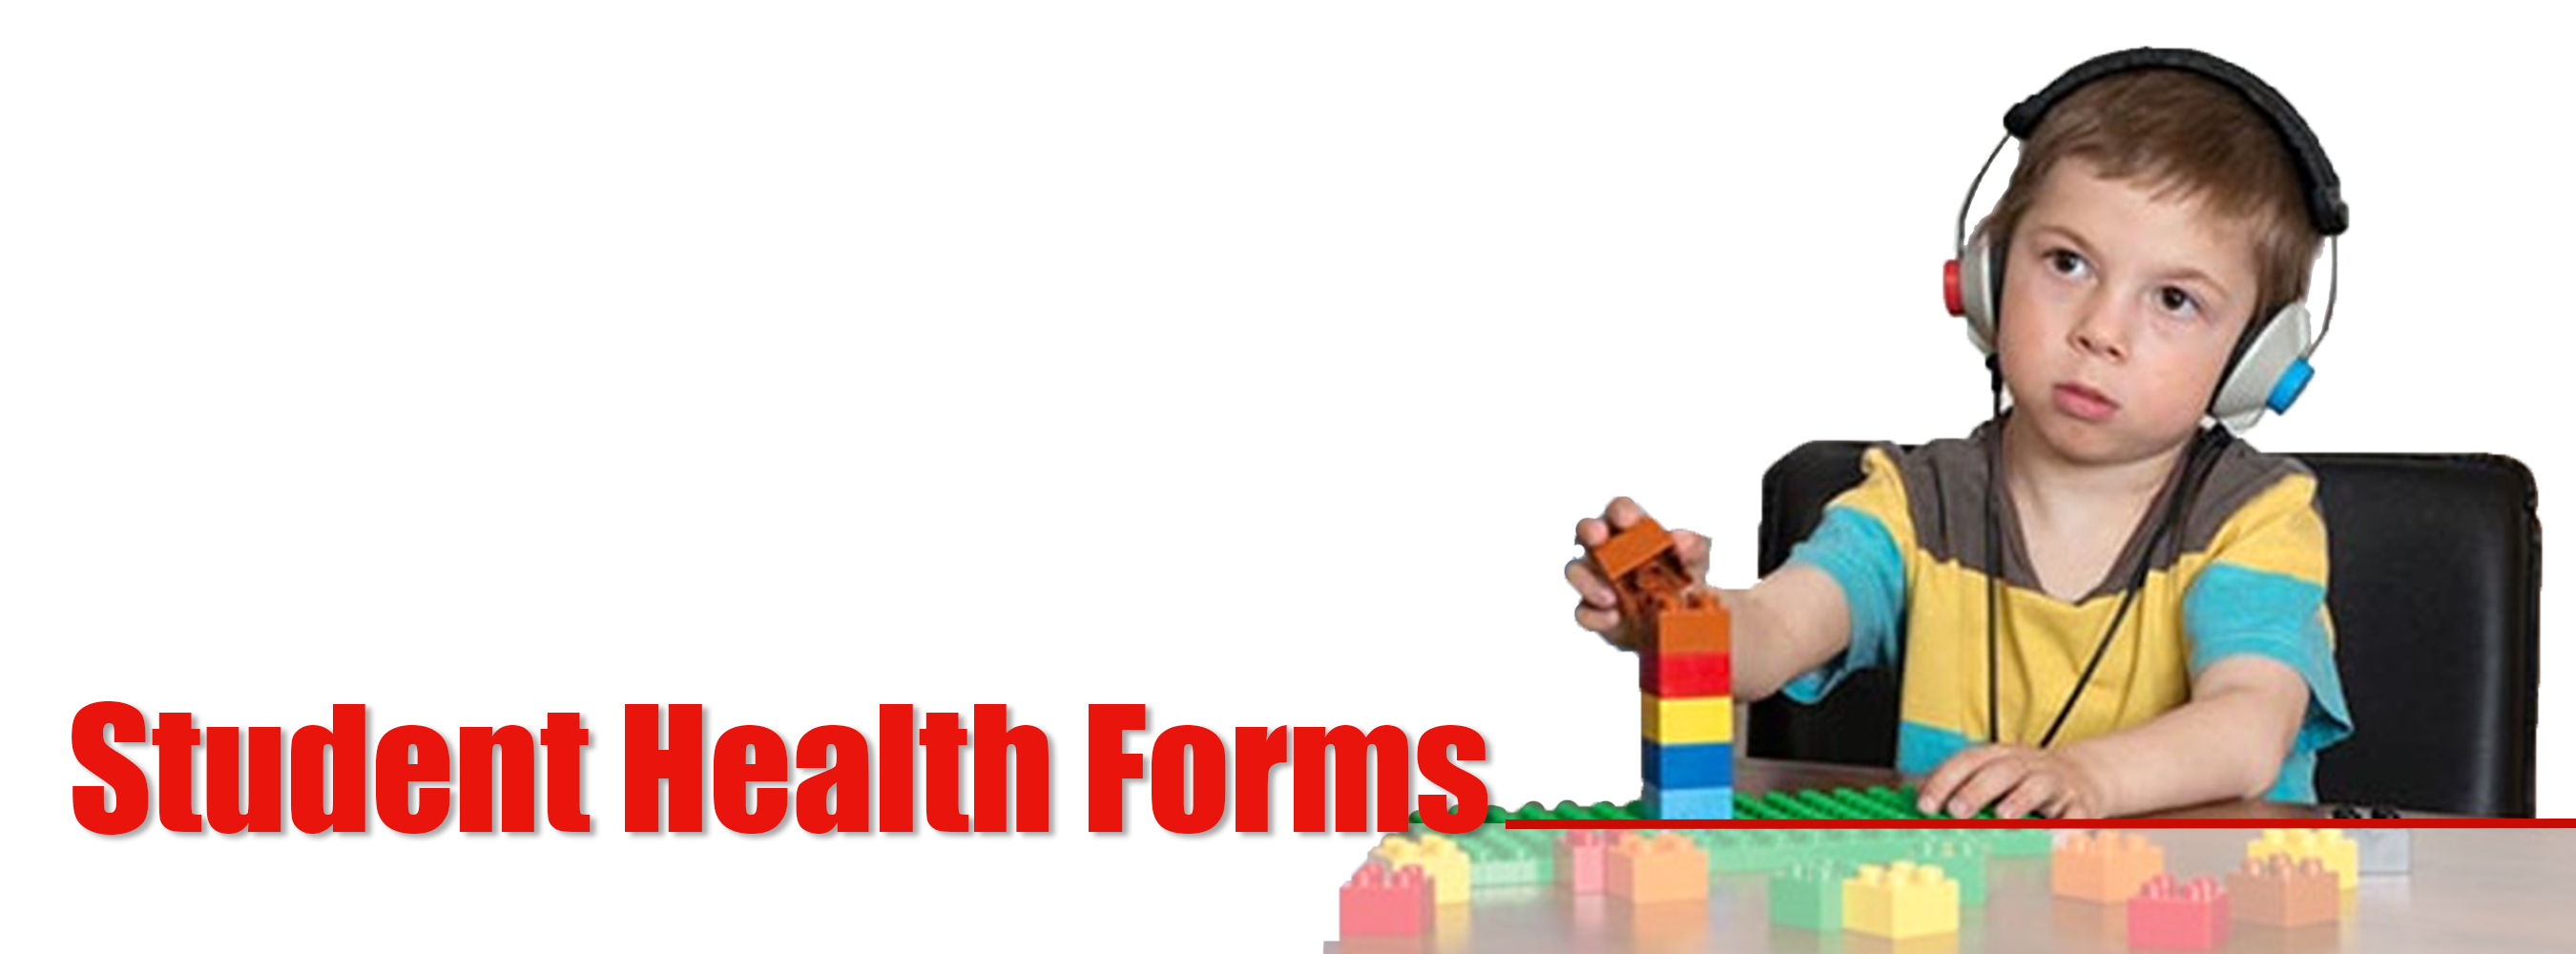 Student Health Forms